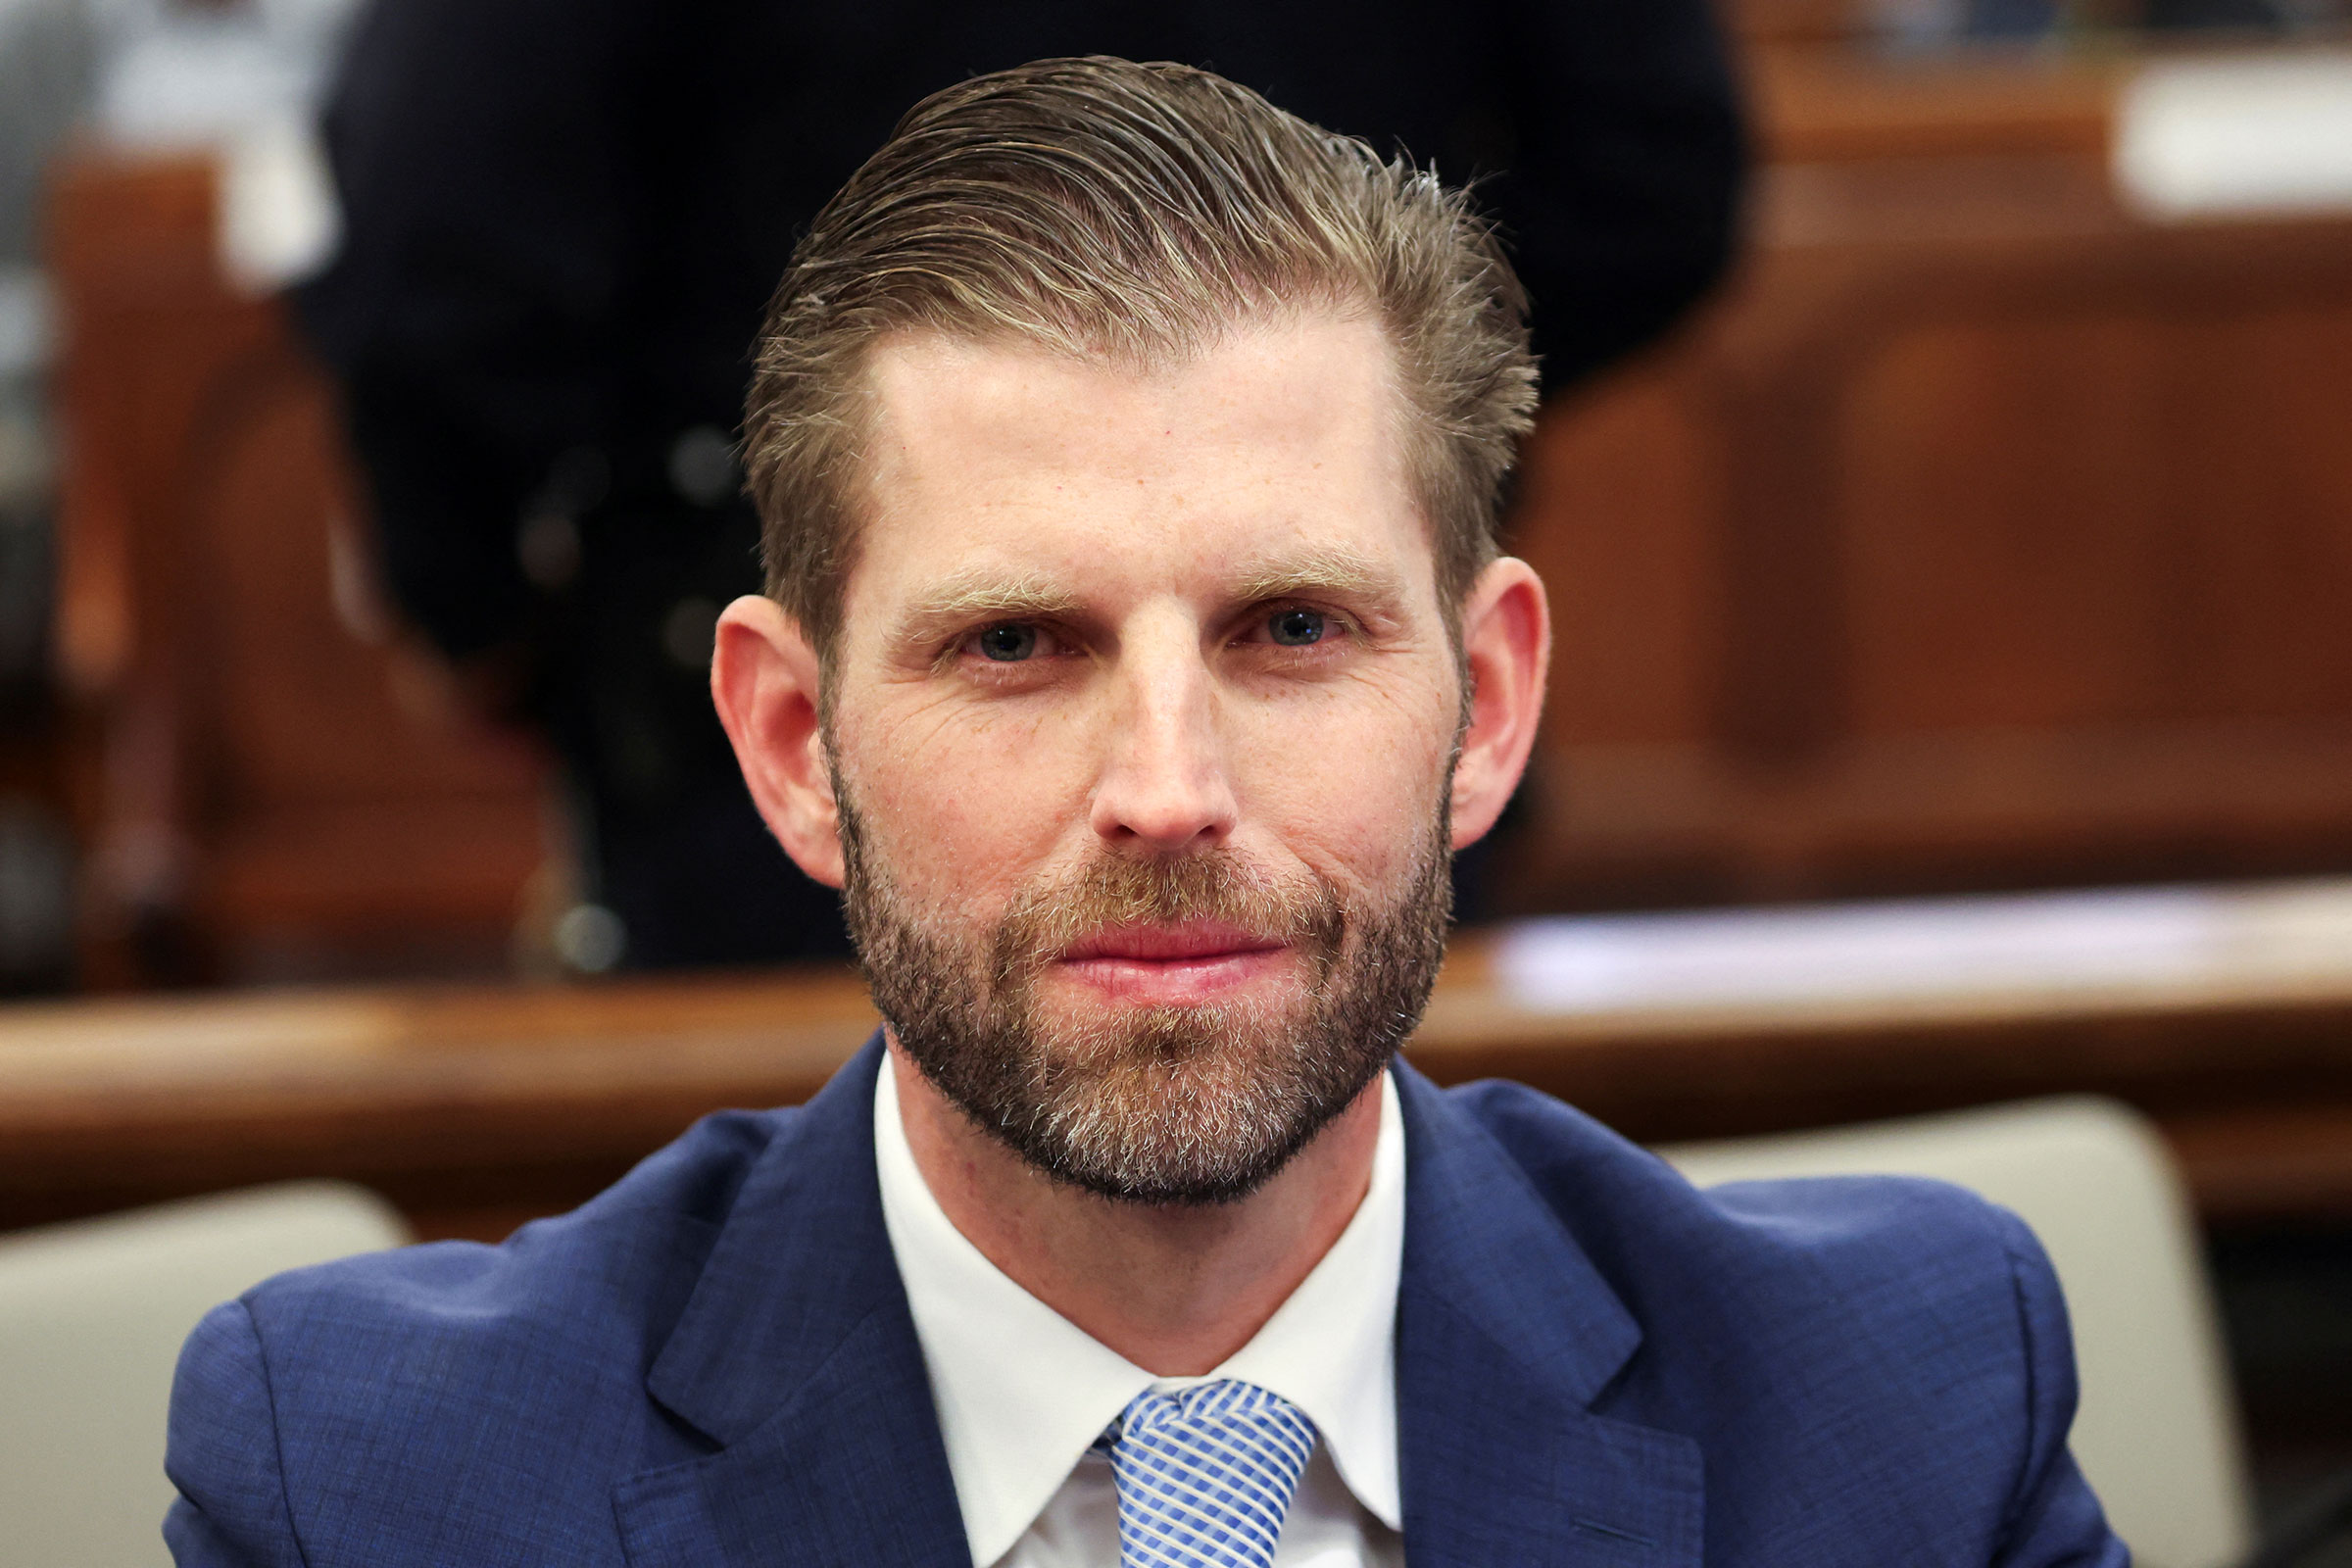 Former President Donald Trump's son and co-defendant, Eric Trump, attends the Trump Organization civil fraud trial, in New York State Supreme Court.